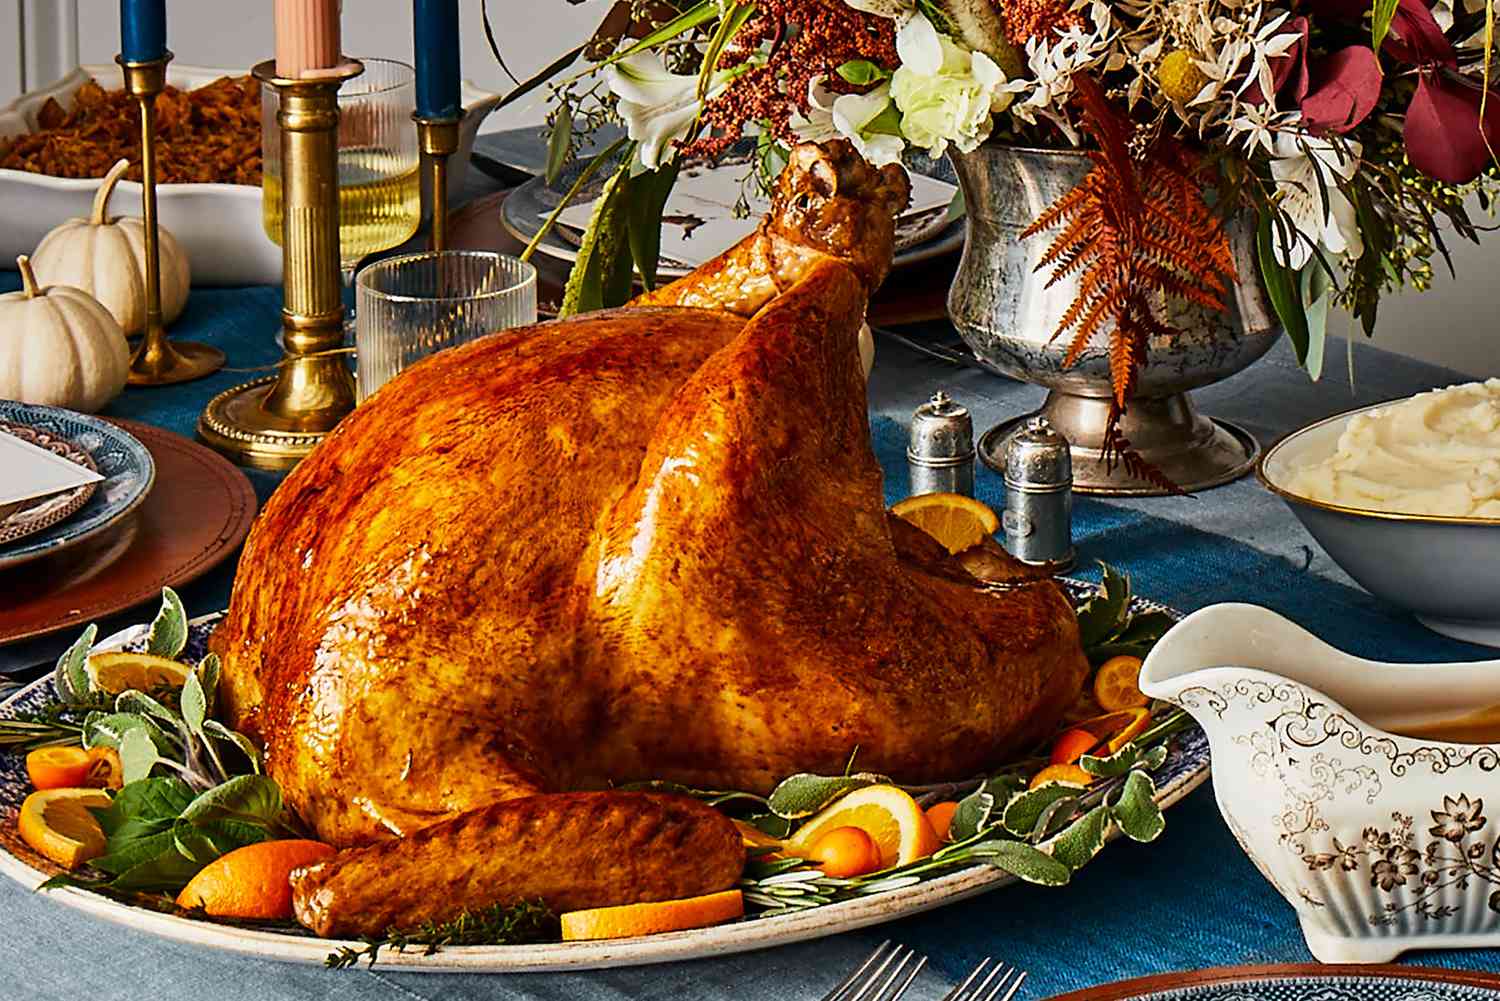 Juicy Thanksgiving Turkey sitting on a well dressed Thanksgiving table